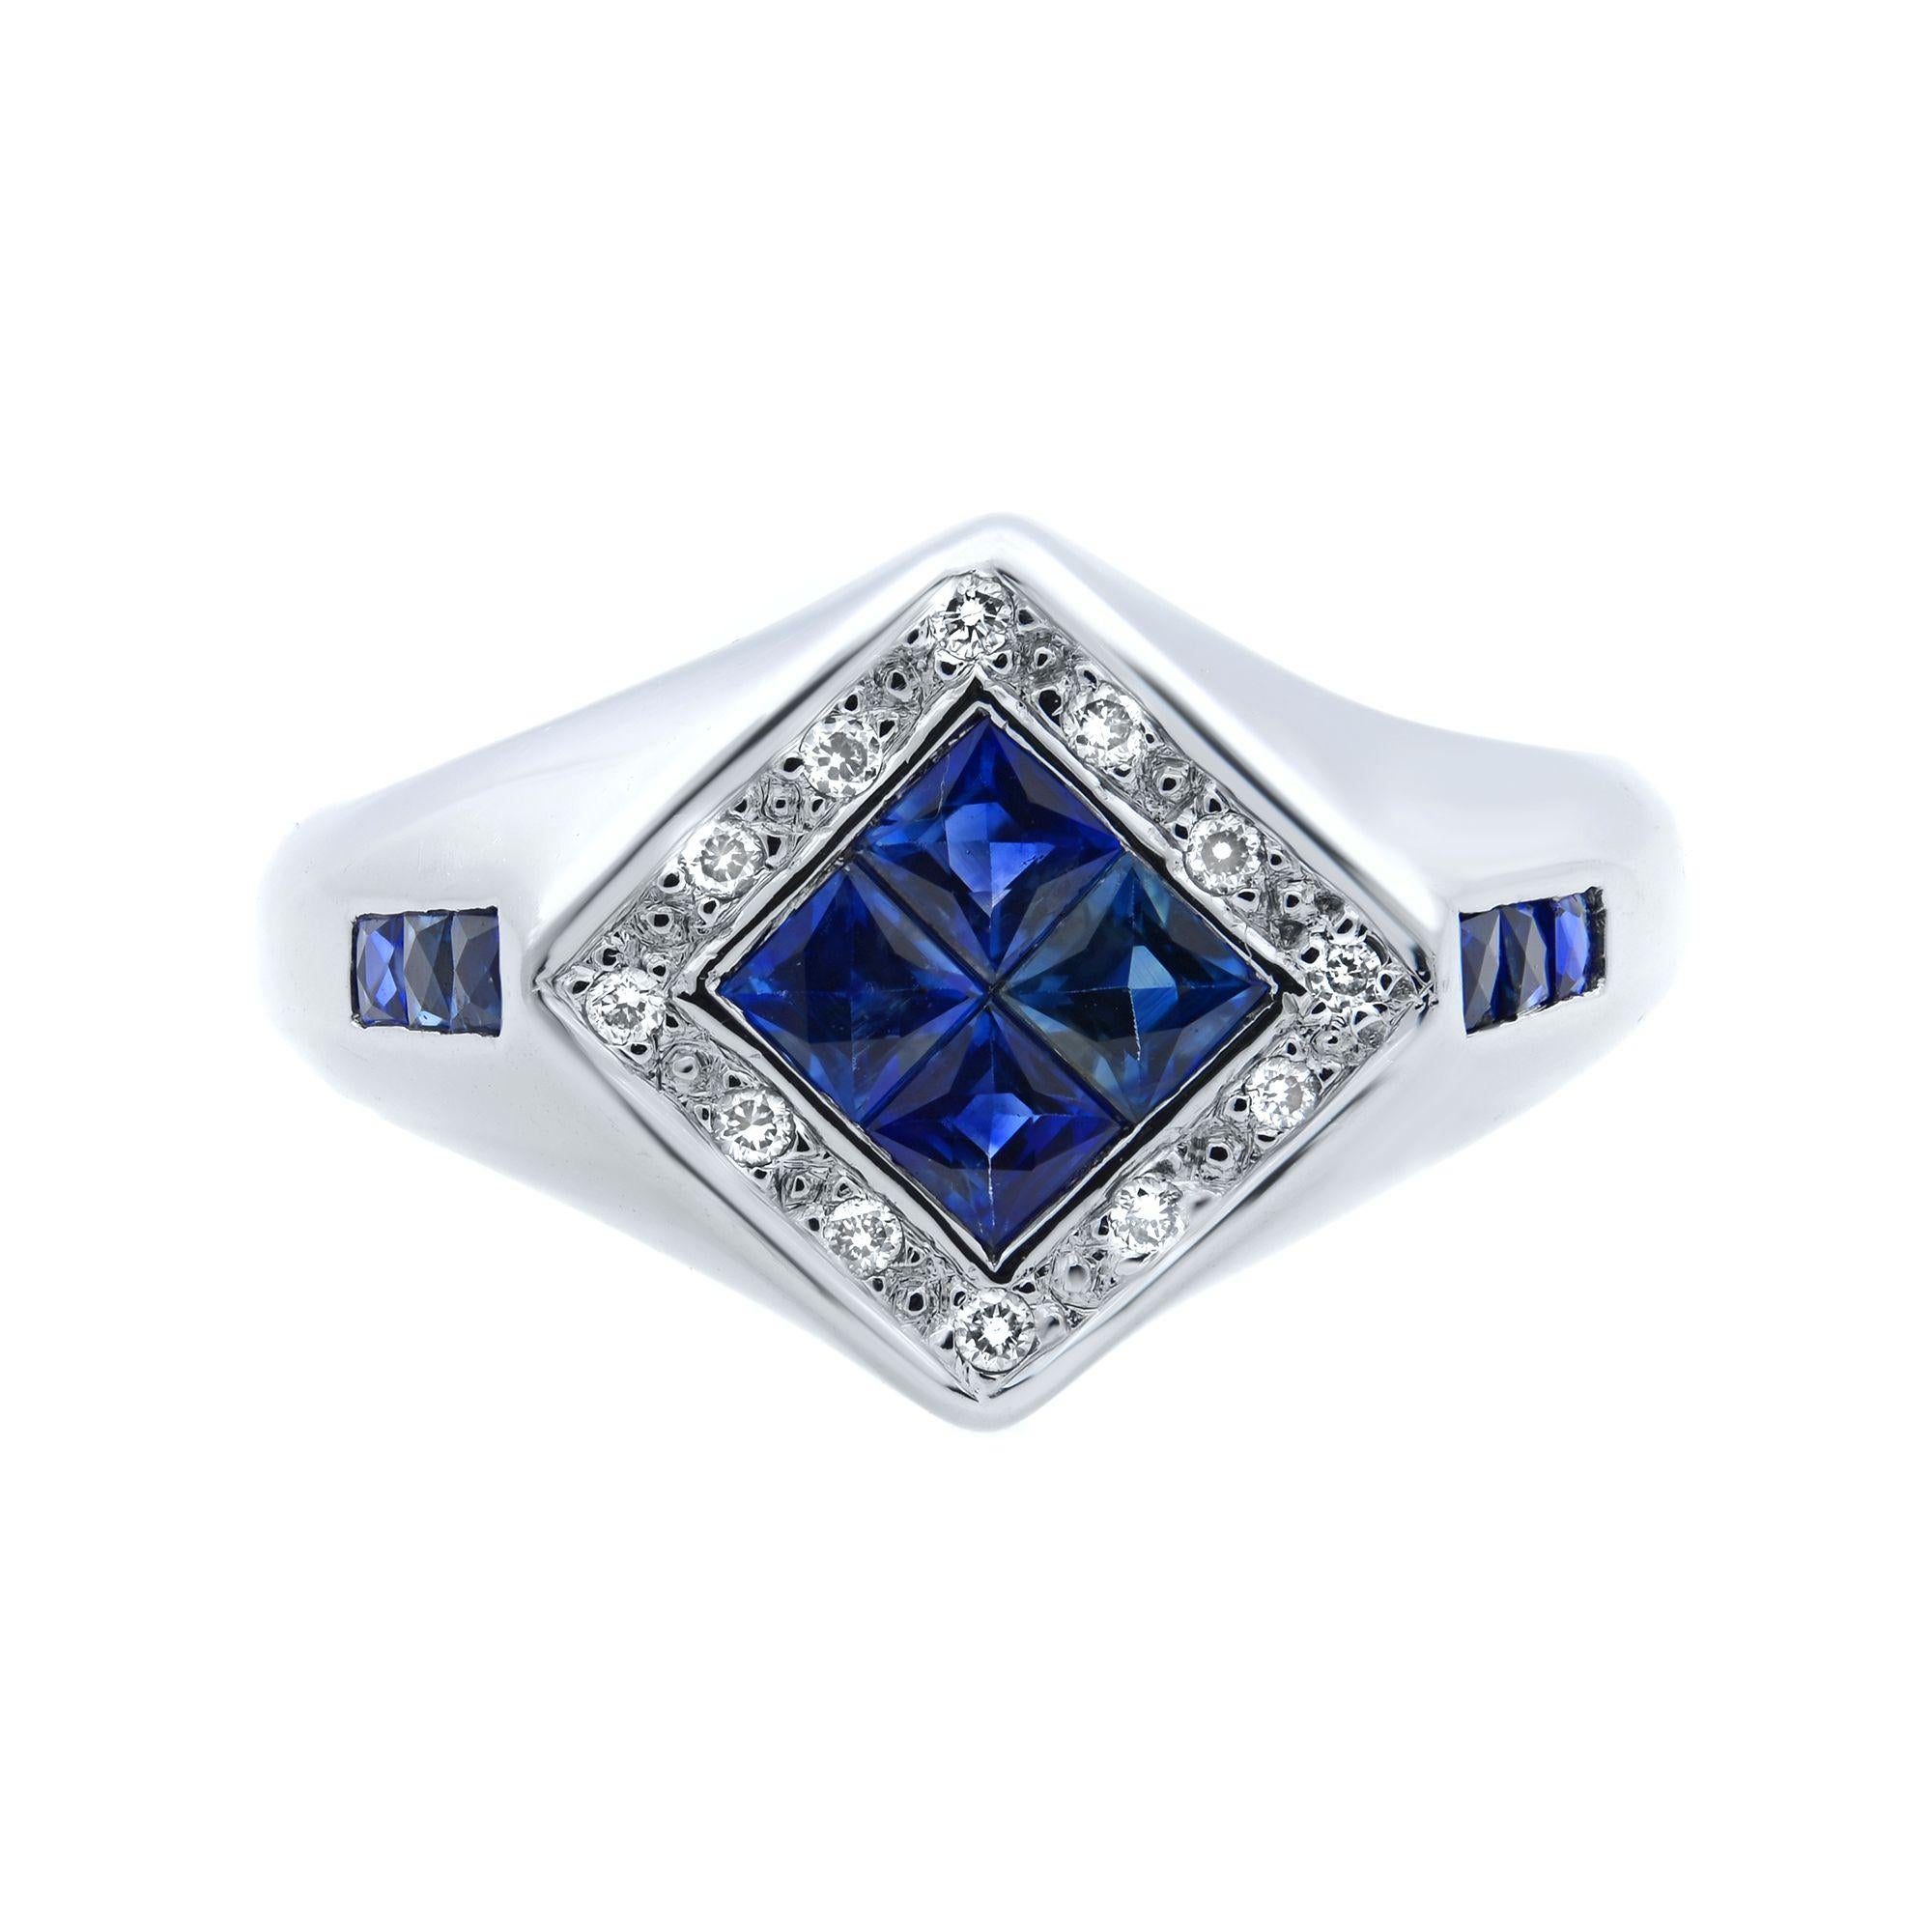 This unique ring holds 4 princess cut blue sapphires at the center and 3 tiny ones on each side of the shank. The halo is set with tiny diamonds. This ring is crafted in 14k white gold. Ring size 7. Blue Sapphire weight: 0.36cts. Diamond weight: